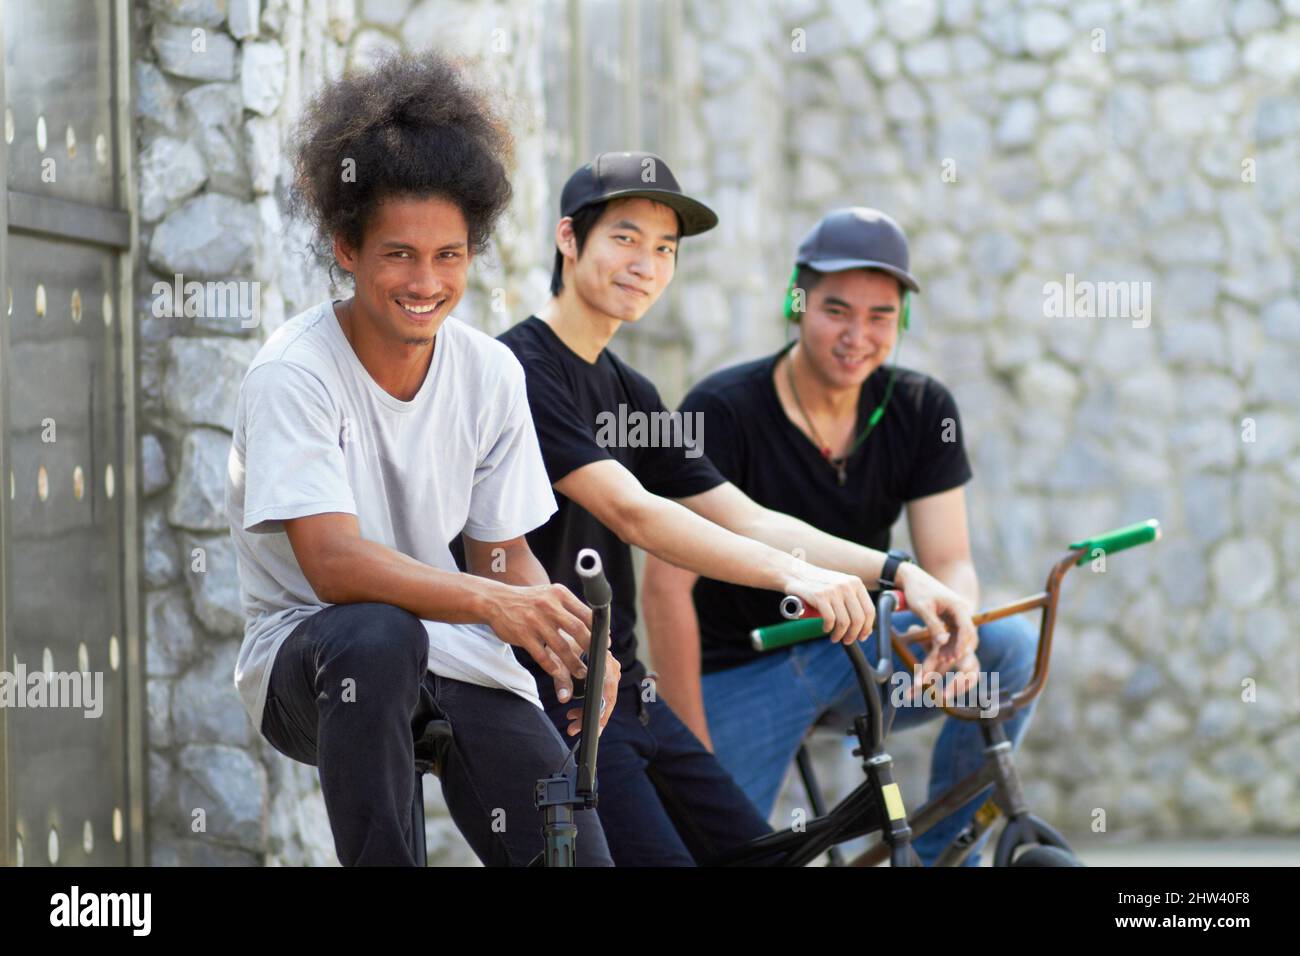 Just chilling between tricks. A group of young bmx riders relaxing together. Stock Photo